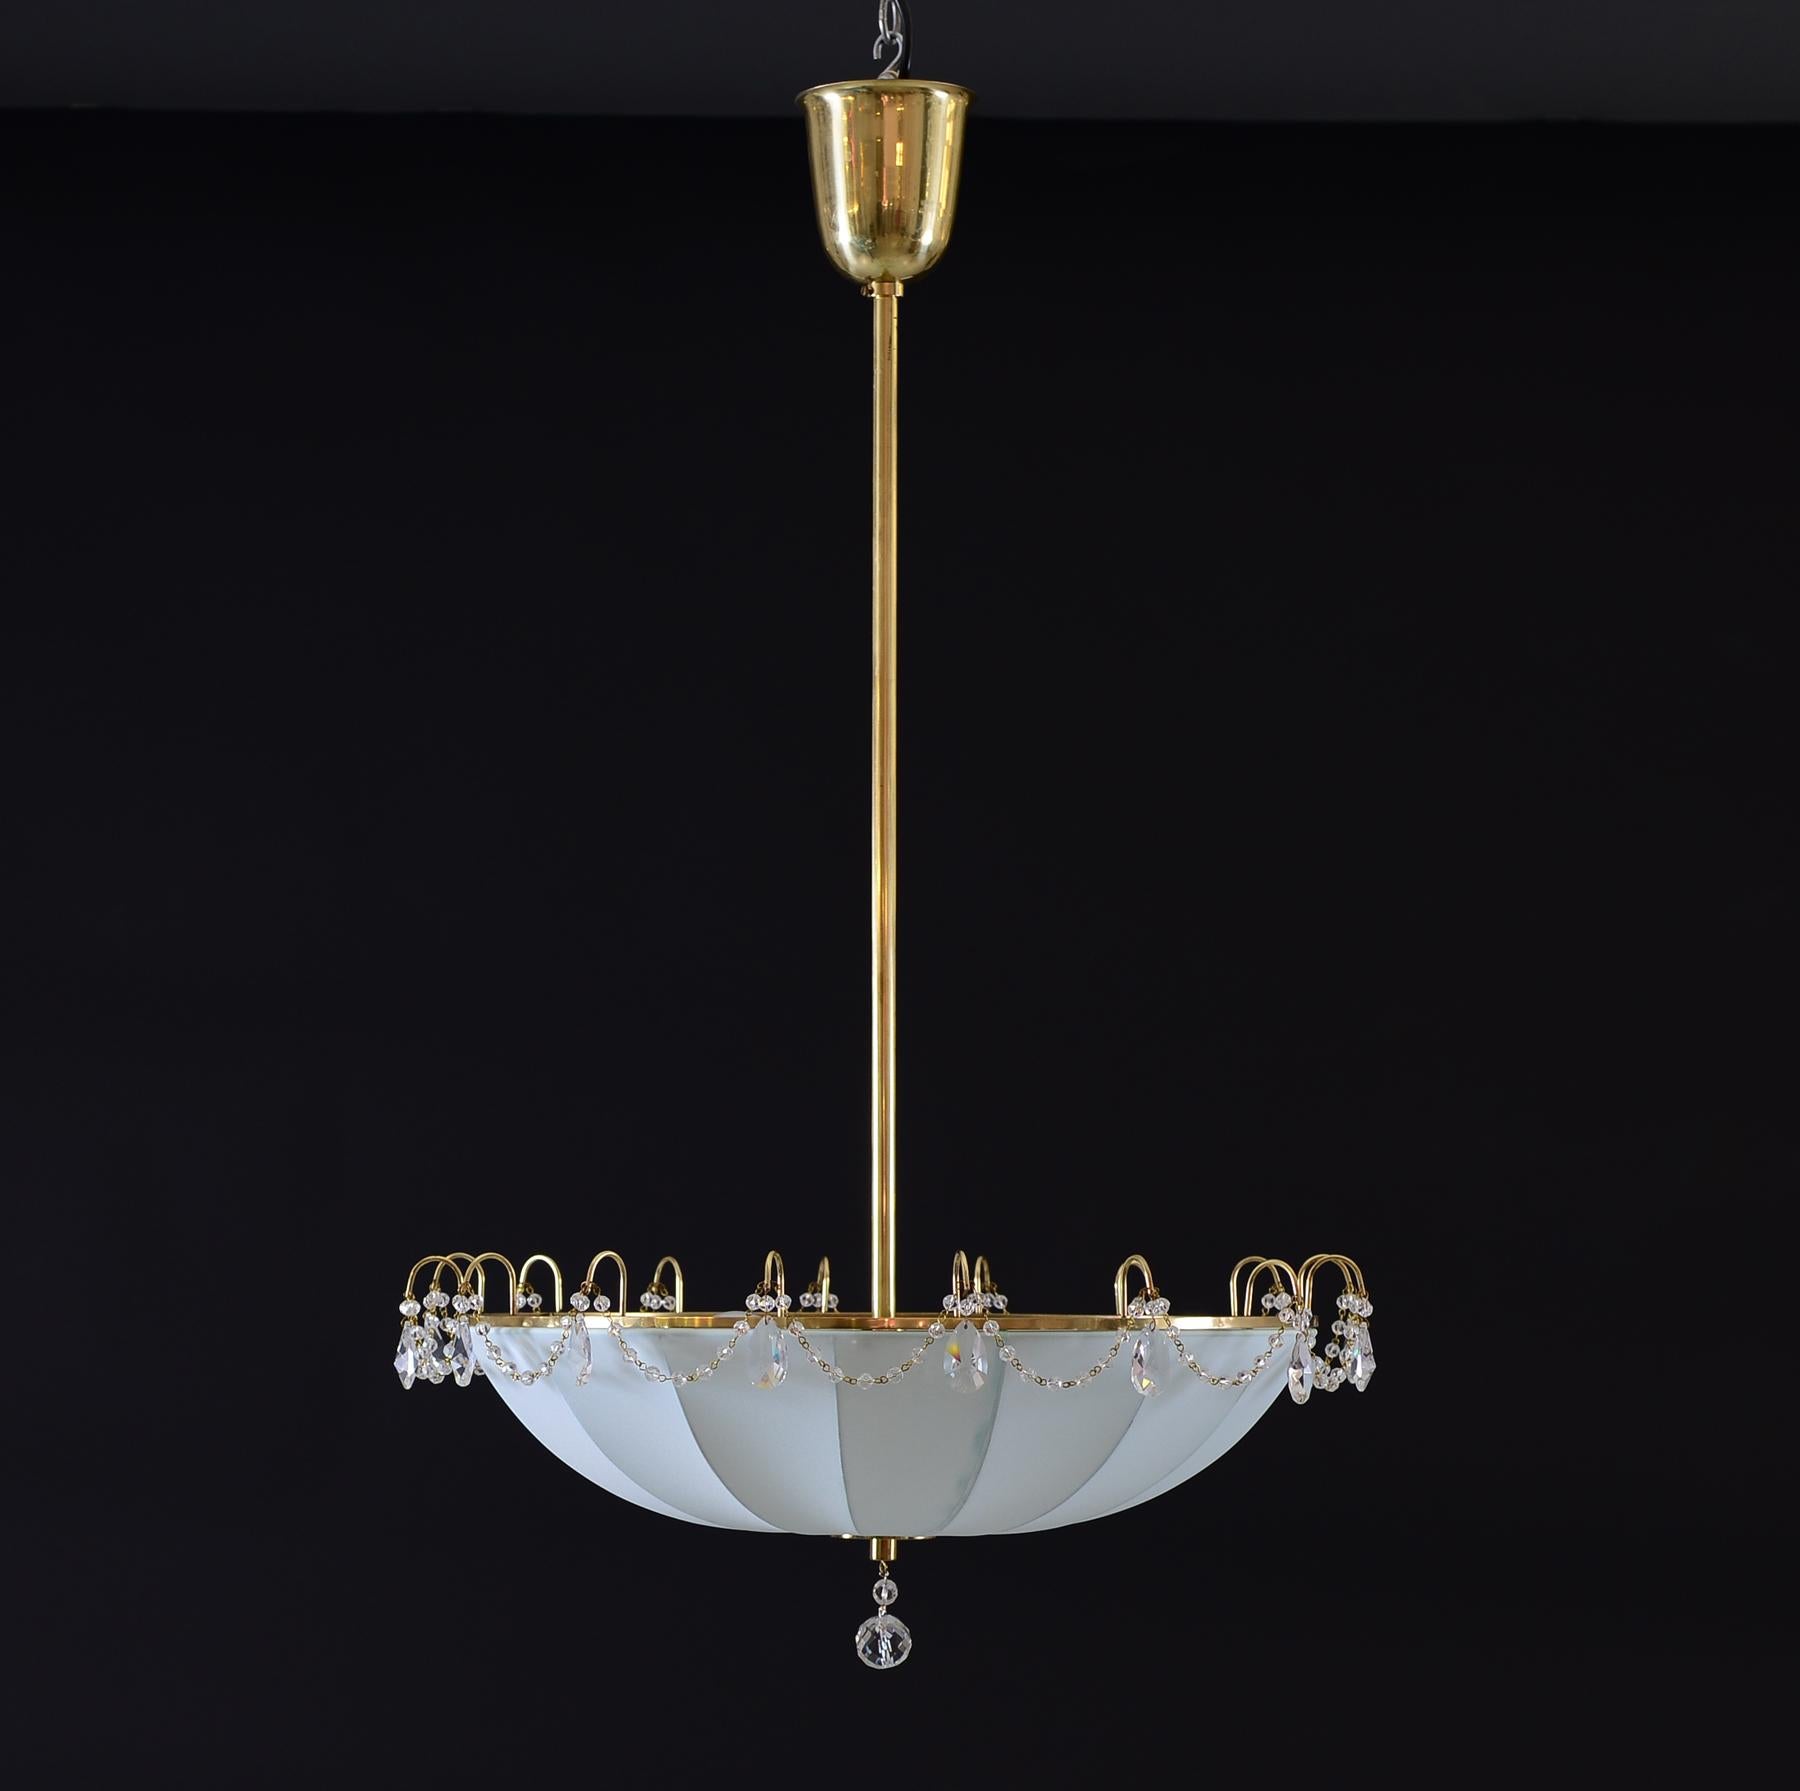 Hand-Crafted Mid-Century Modern Style Silk and Crystal Glass Umbrella Chandelier, Re-Edition For Sale